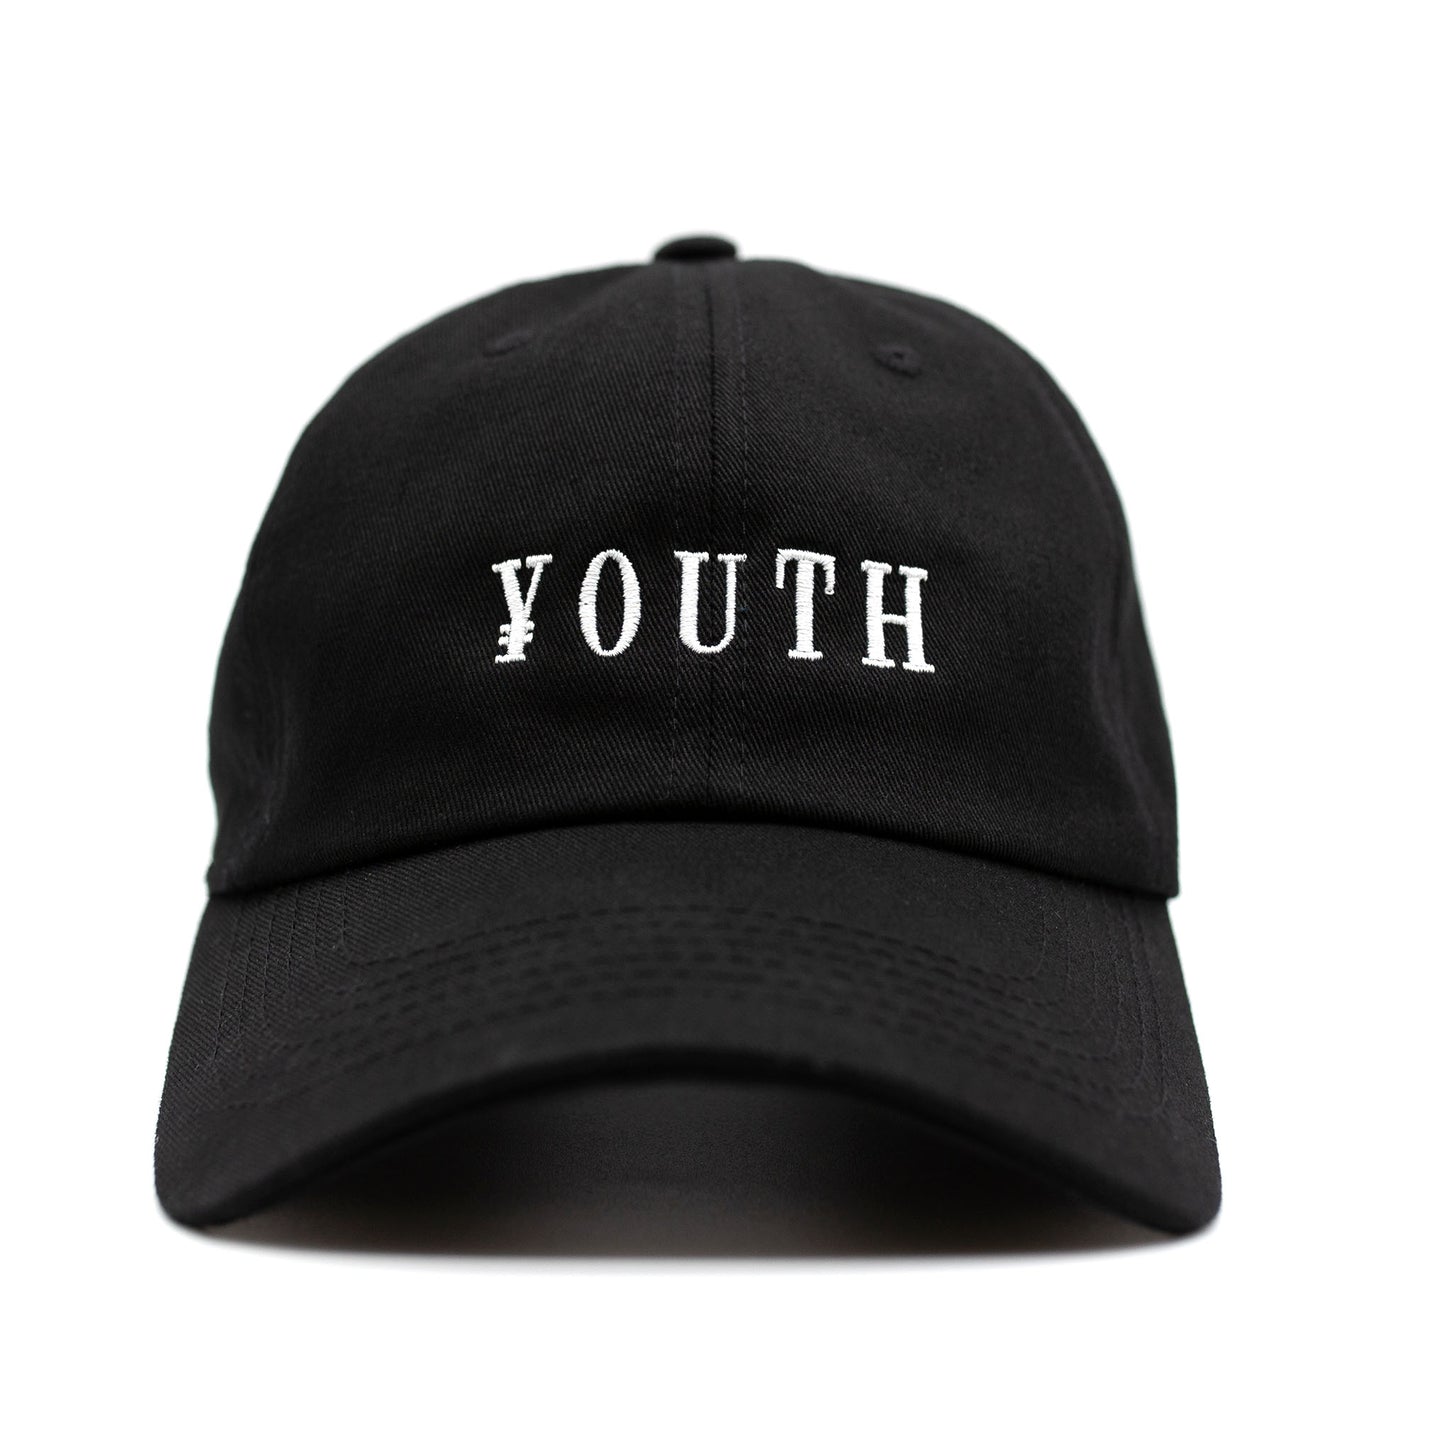 ¥OUTH Dad Hat // Black & White - IKendoit.Shop